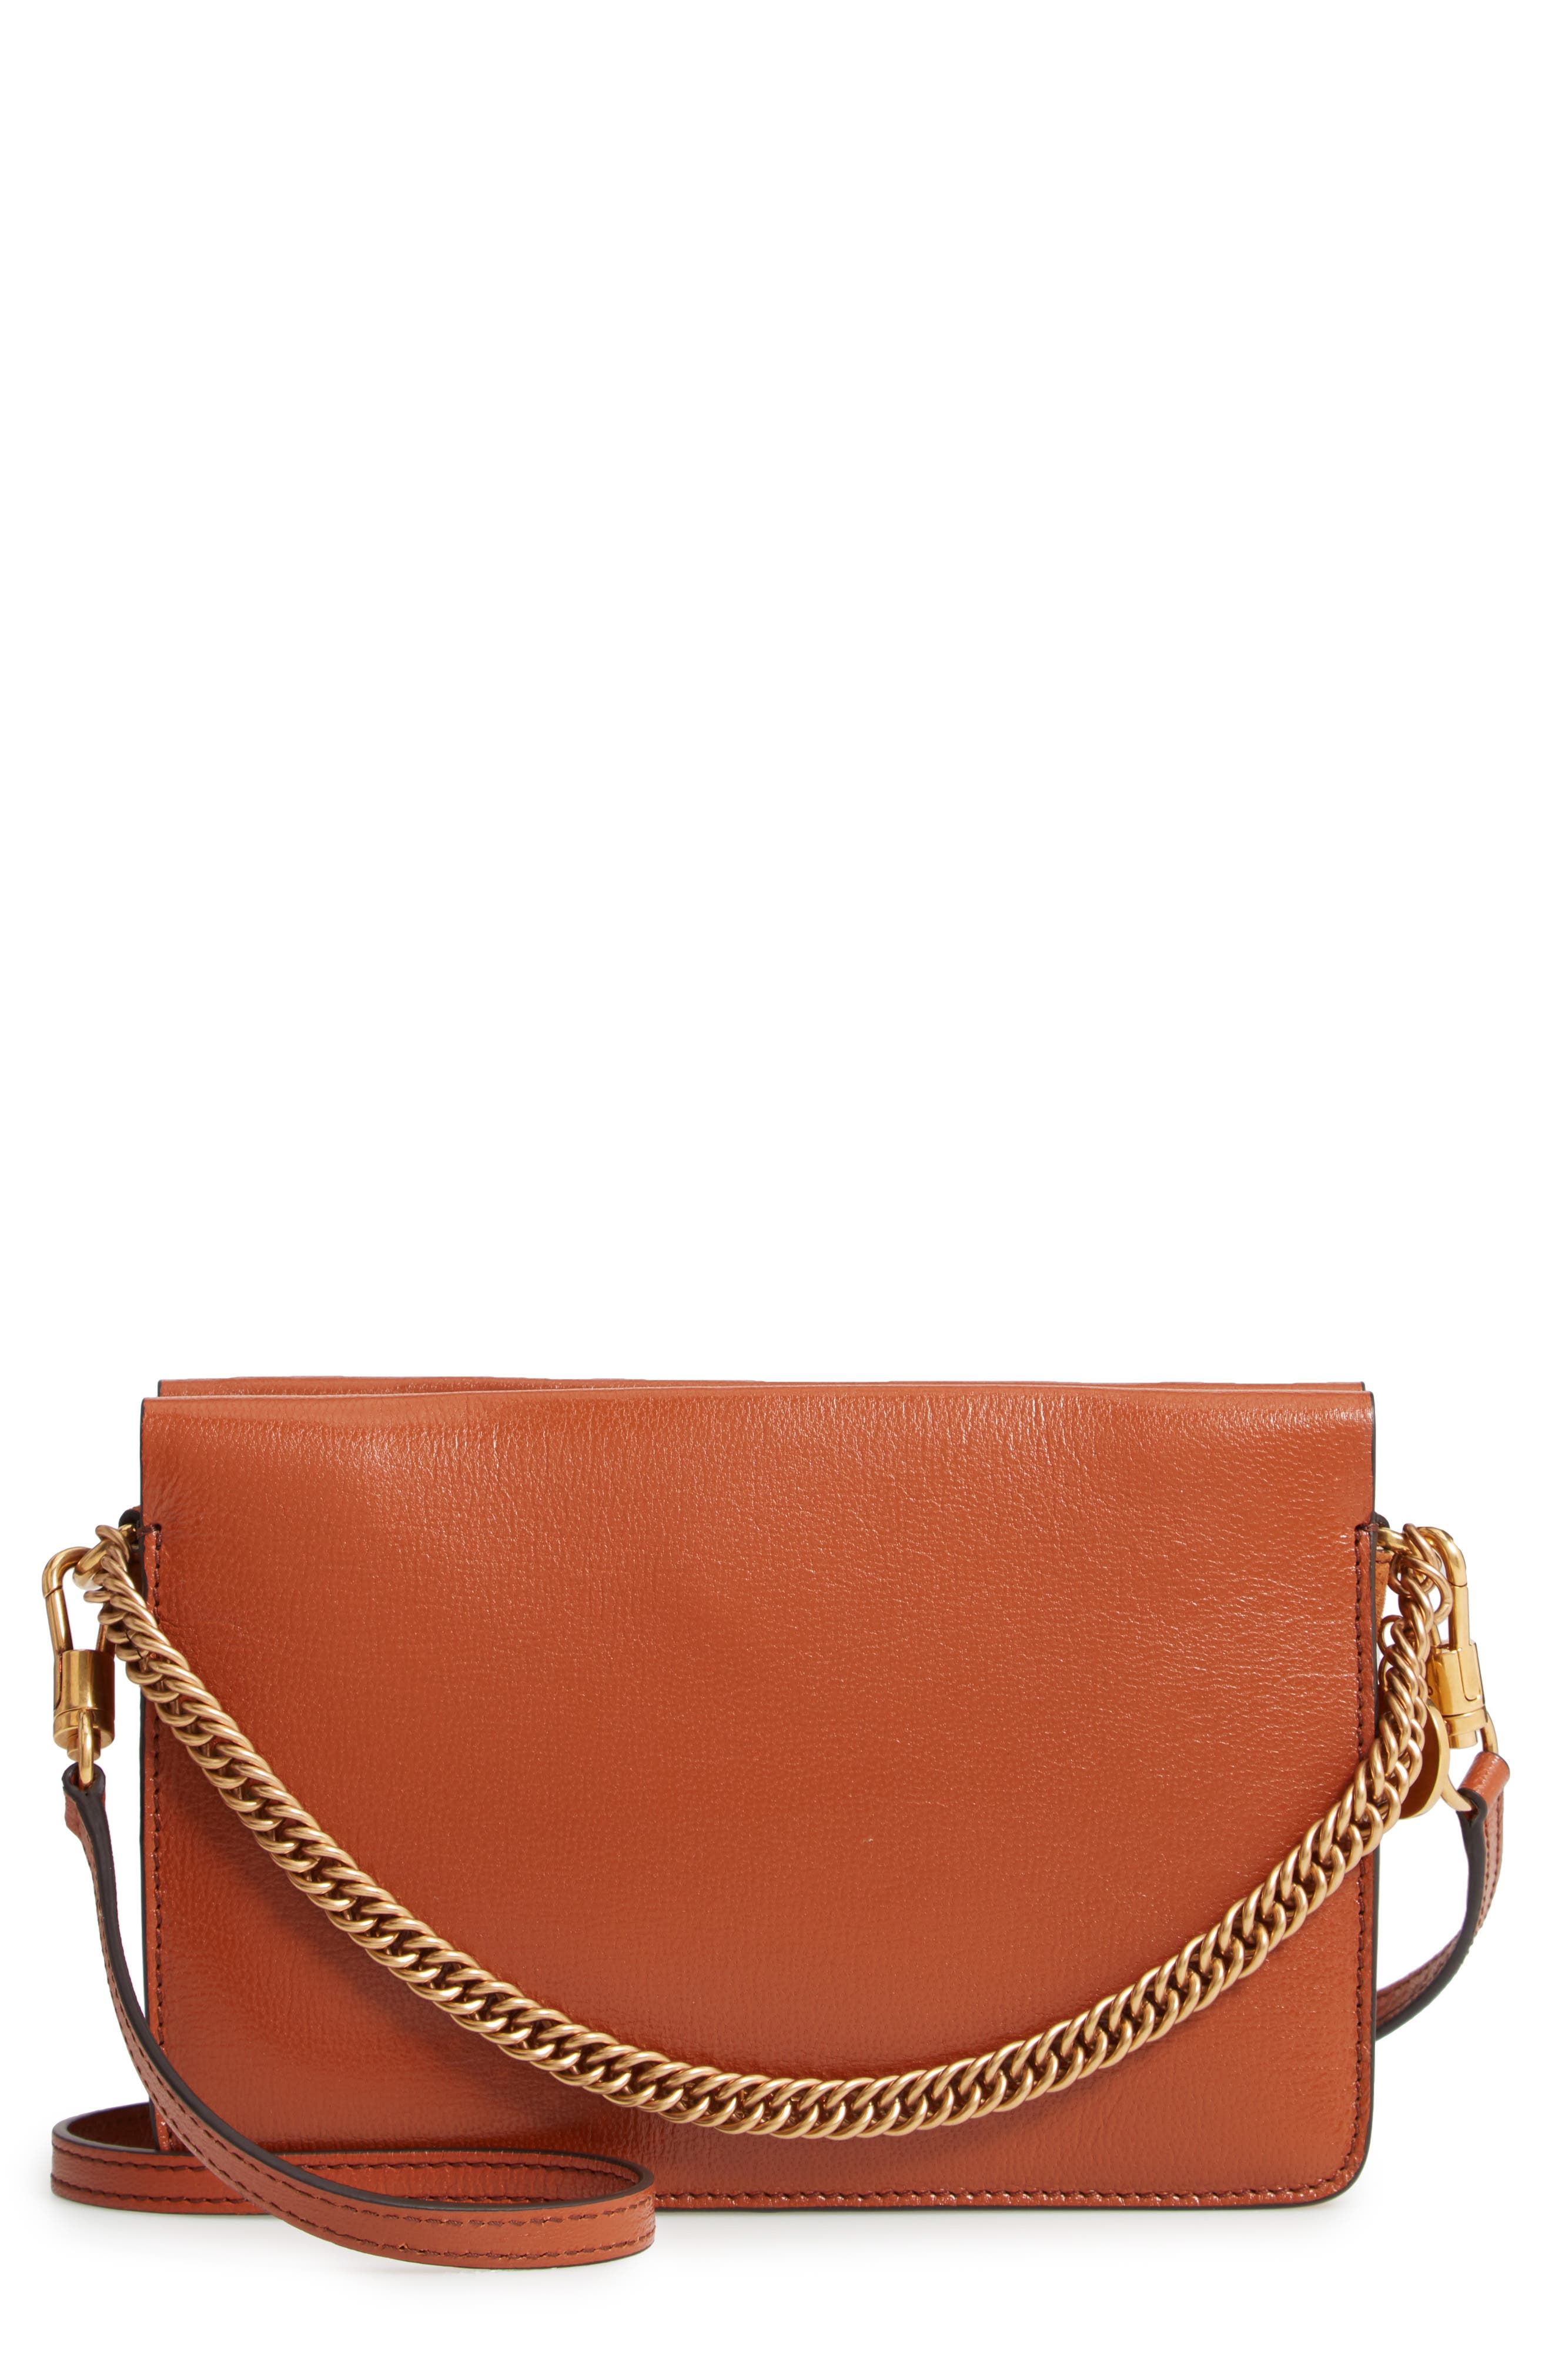 givenchy purse nordstrom